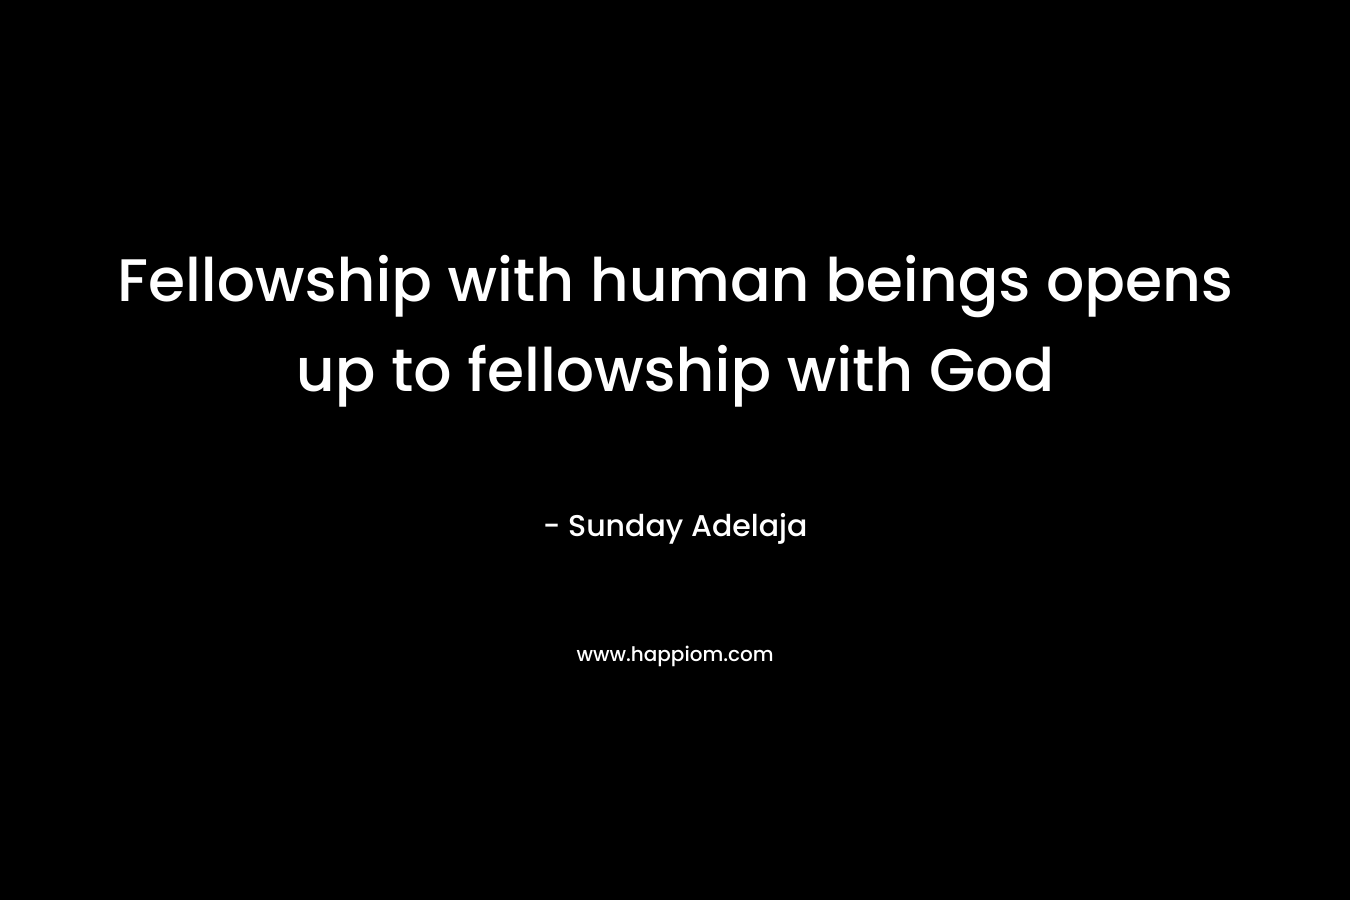 Fellowship with human beings opens up to fellowship with God